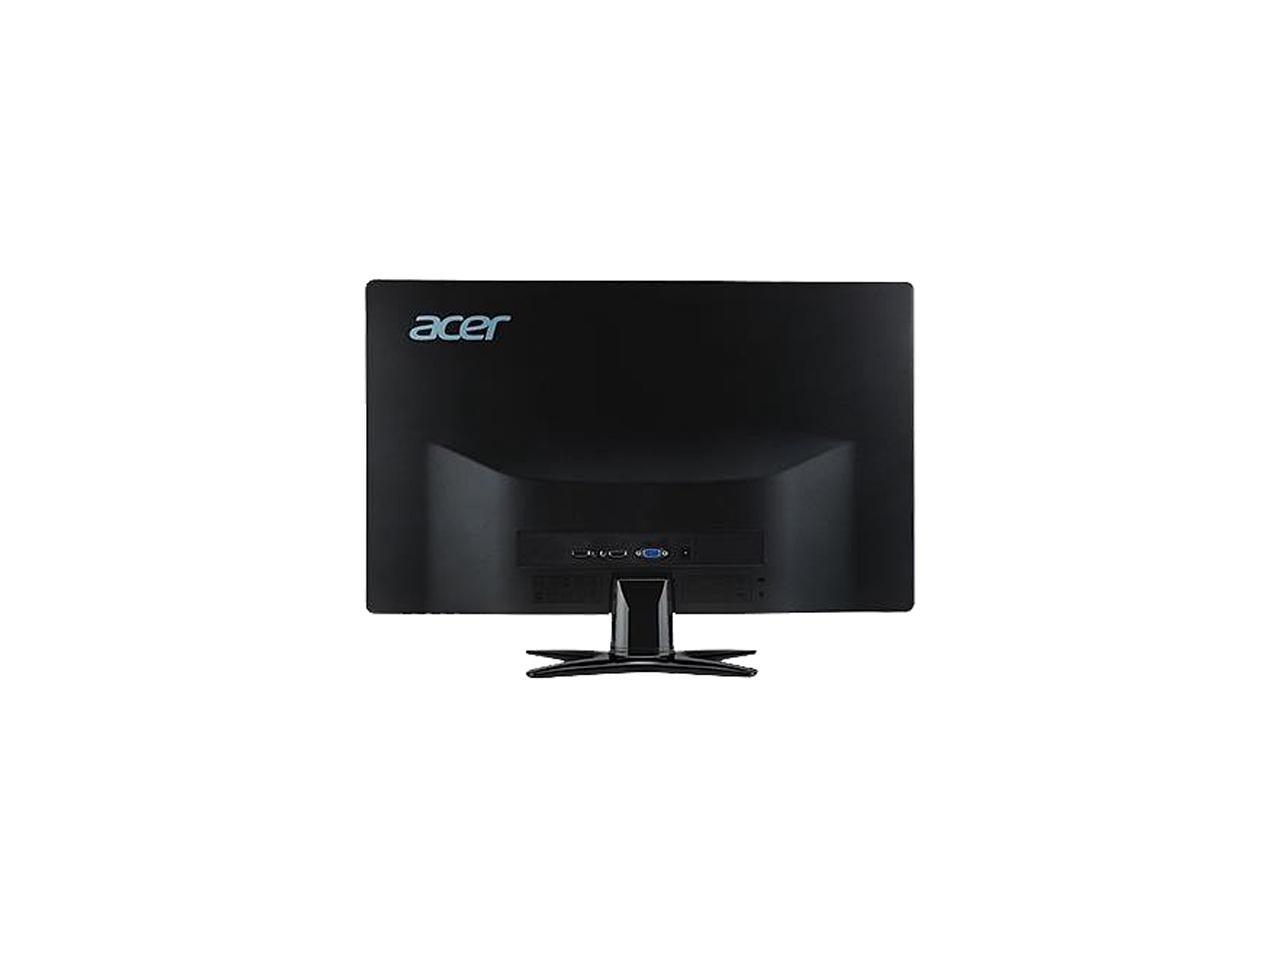 Acer G6 Series G246HYL Black 23.8" IPS 6ms (GTG) 60 Hz Widescreen LED/LCD Monitor 1920 x 1080 FHD, Slim Profile Design, White LED Backlight Technology, and Environmentally Friendly